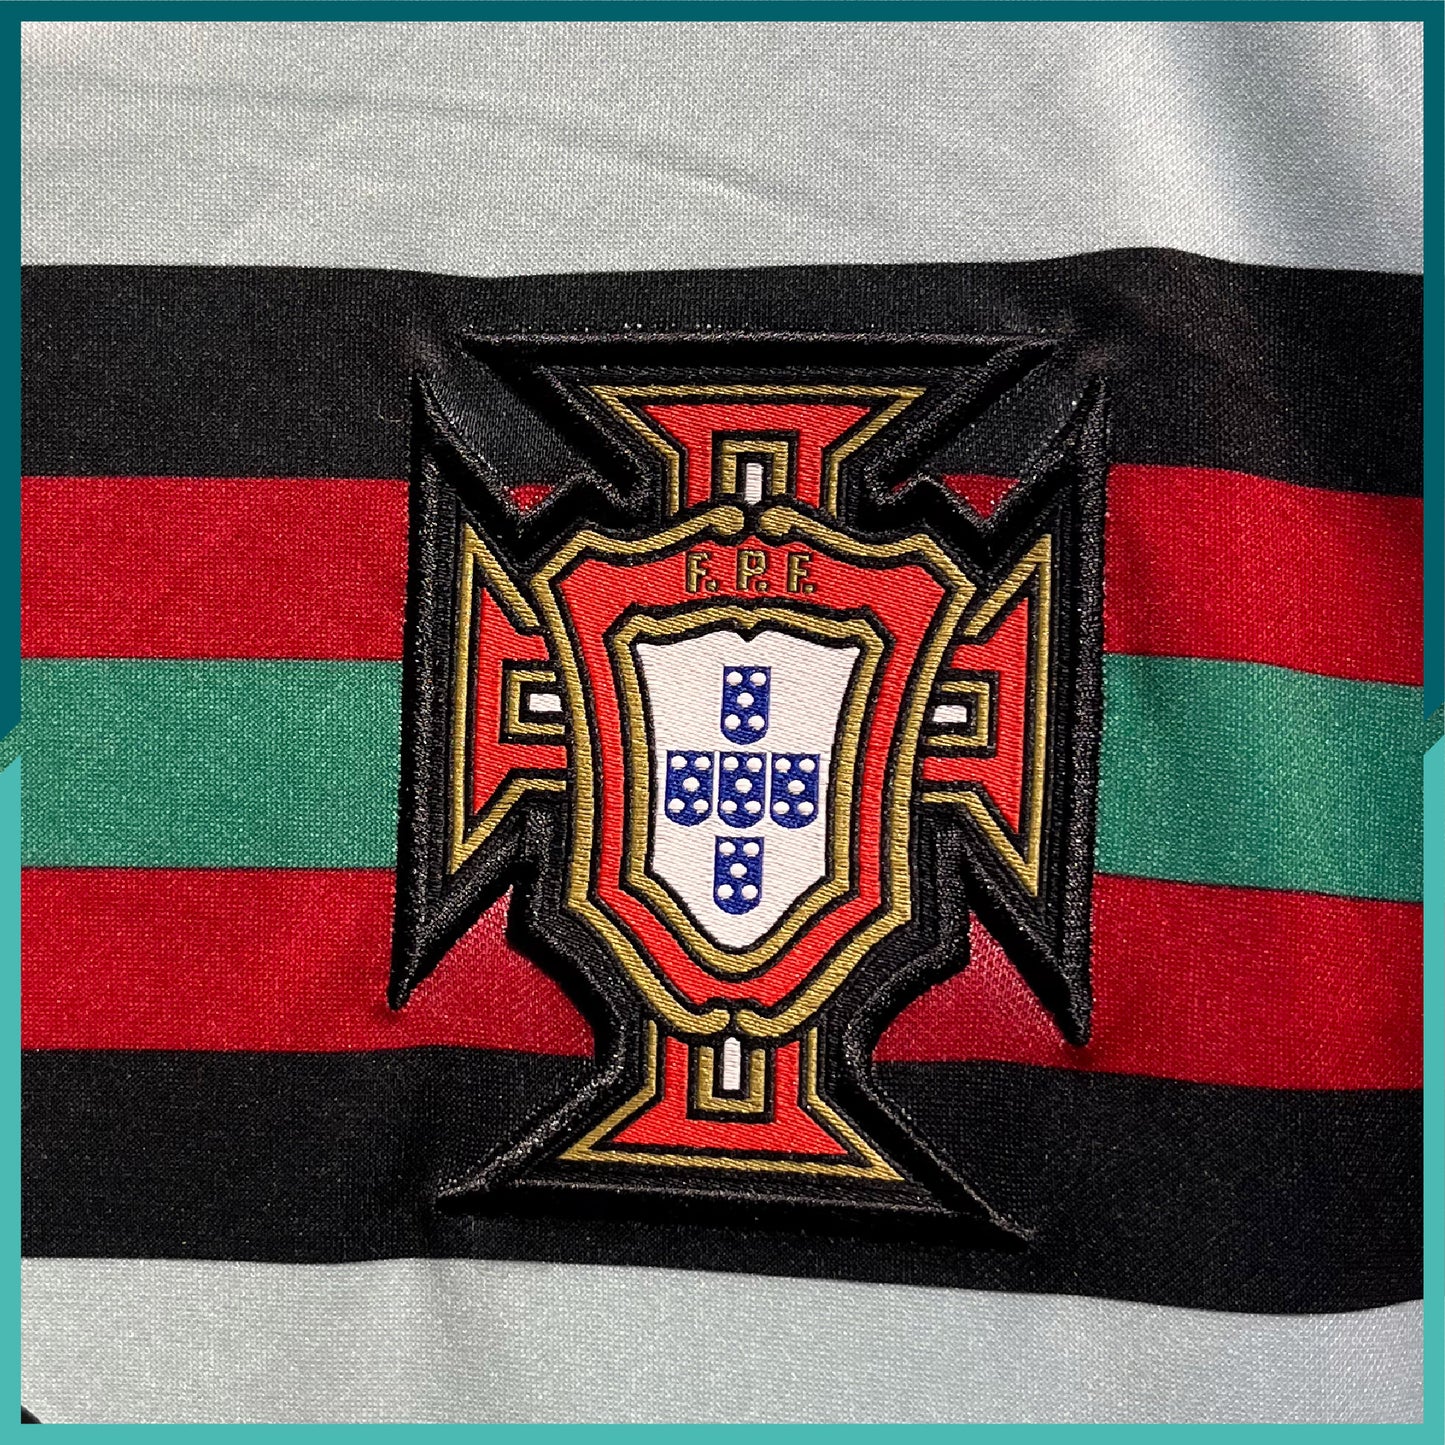 [Nameset & Patchs Included] 2020-22 Portugal Away Jersey